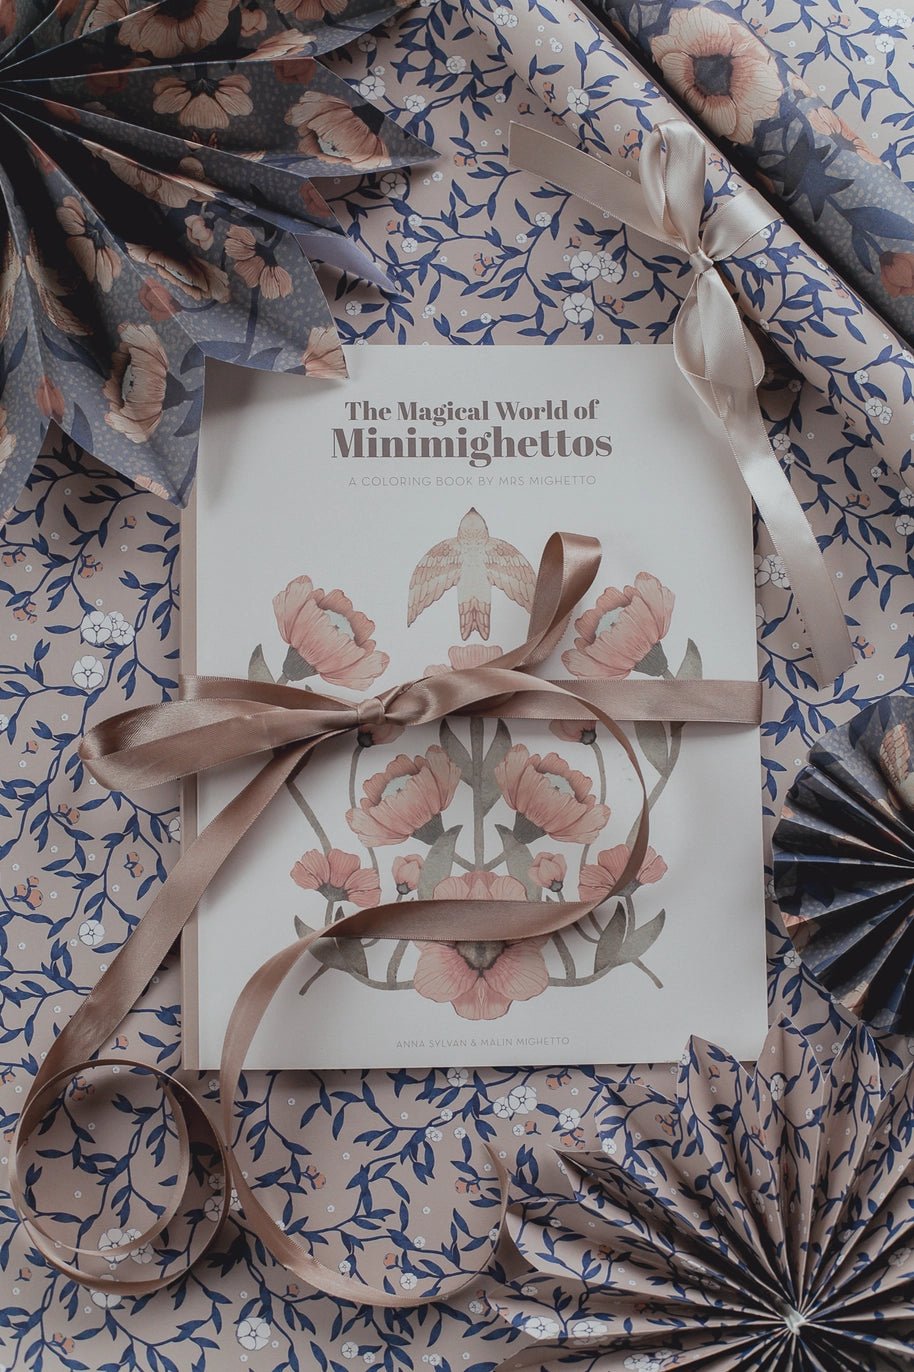 The Magical Word of Minimighettos Colouring Book by Mrs Mightetto - Maude Kids Decor